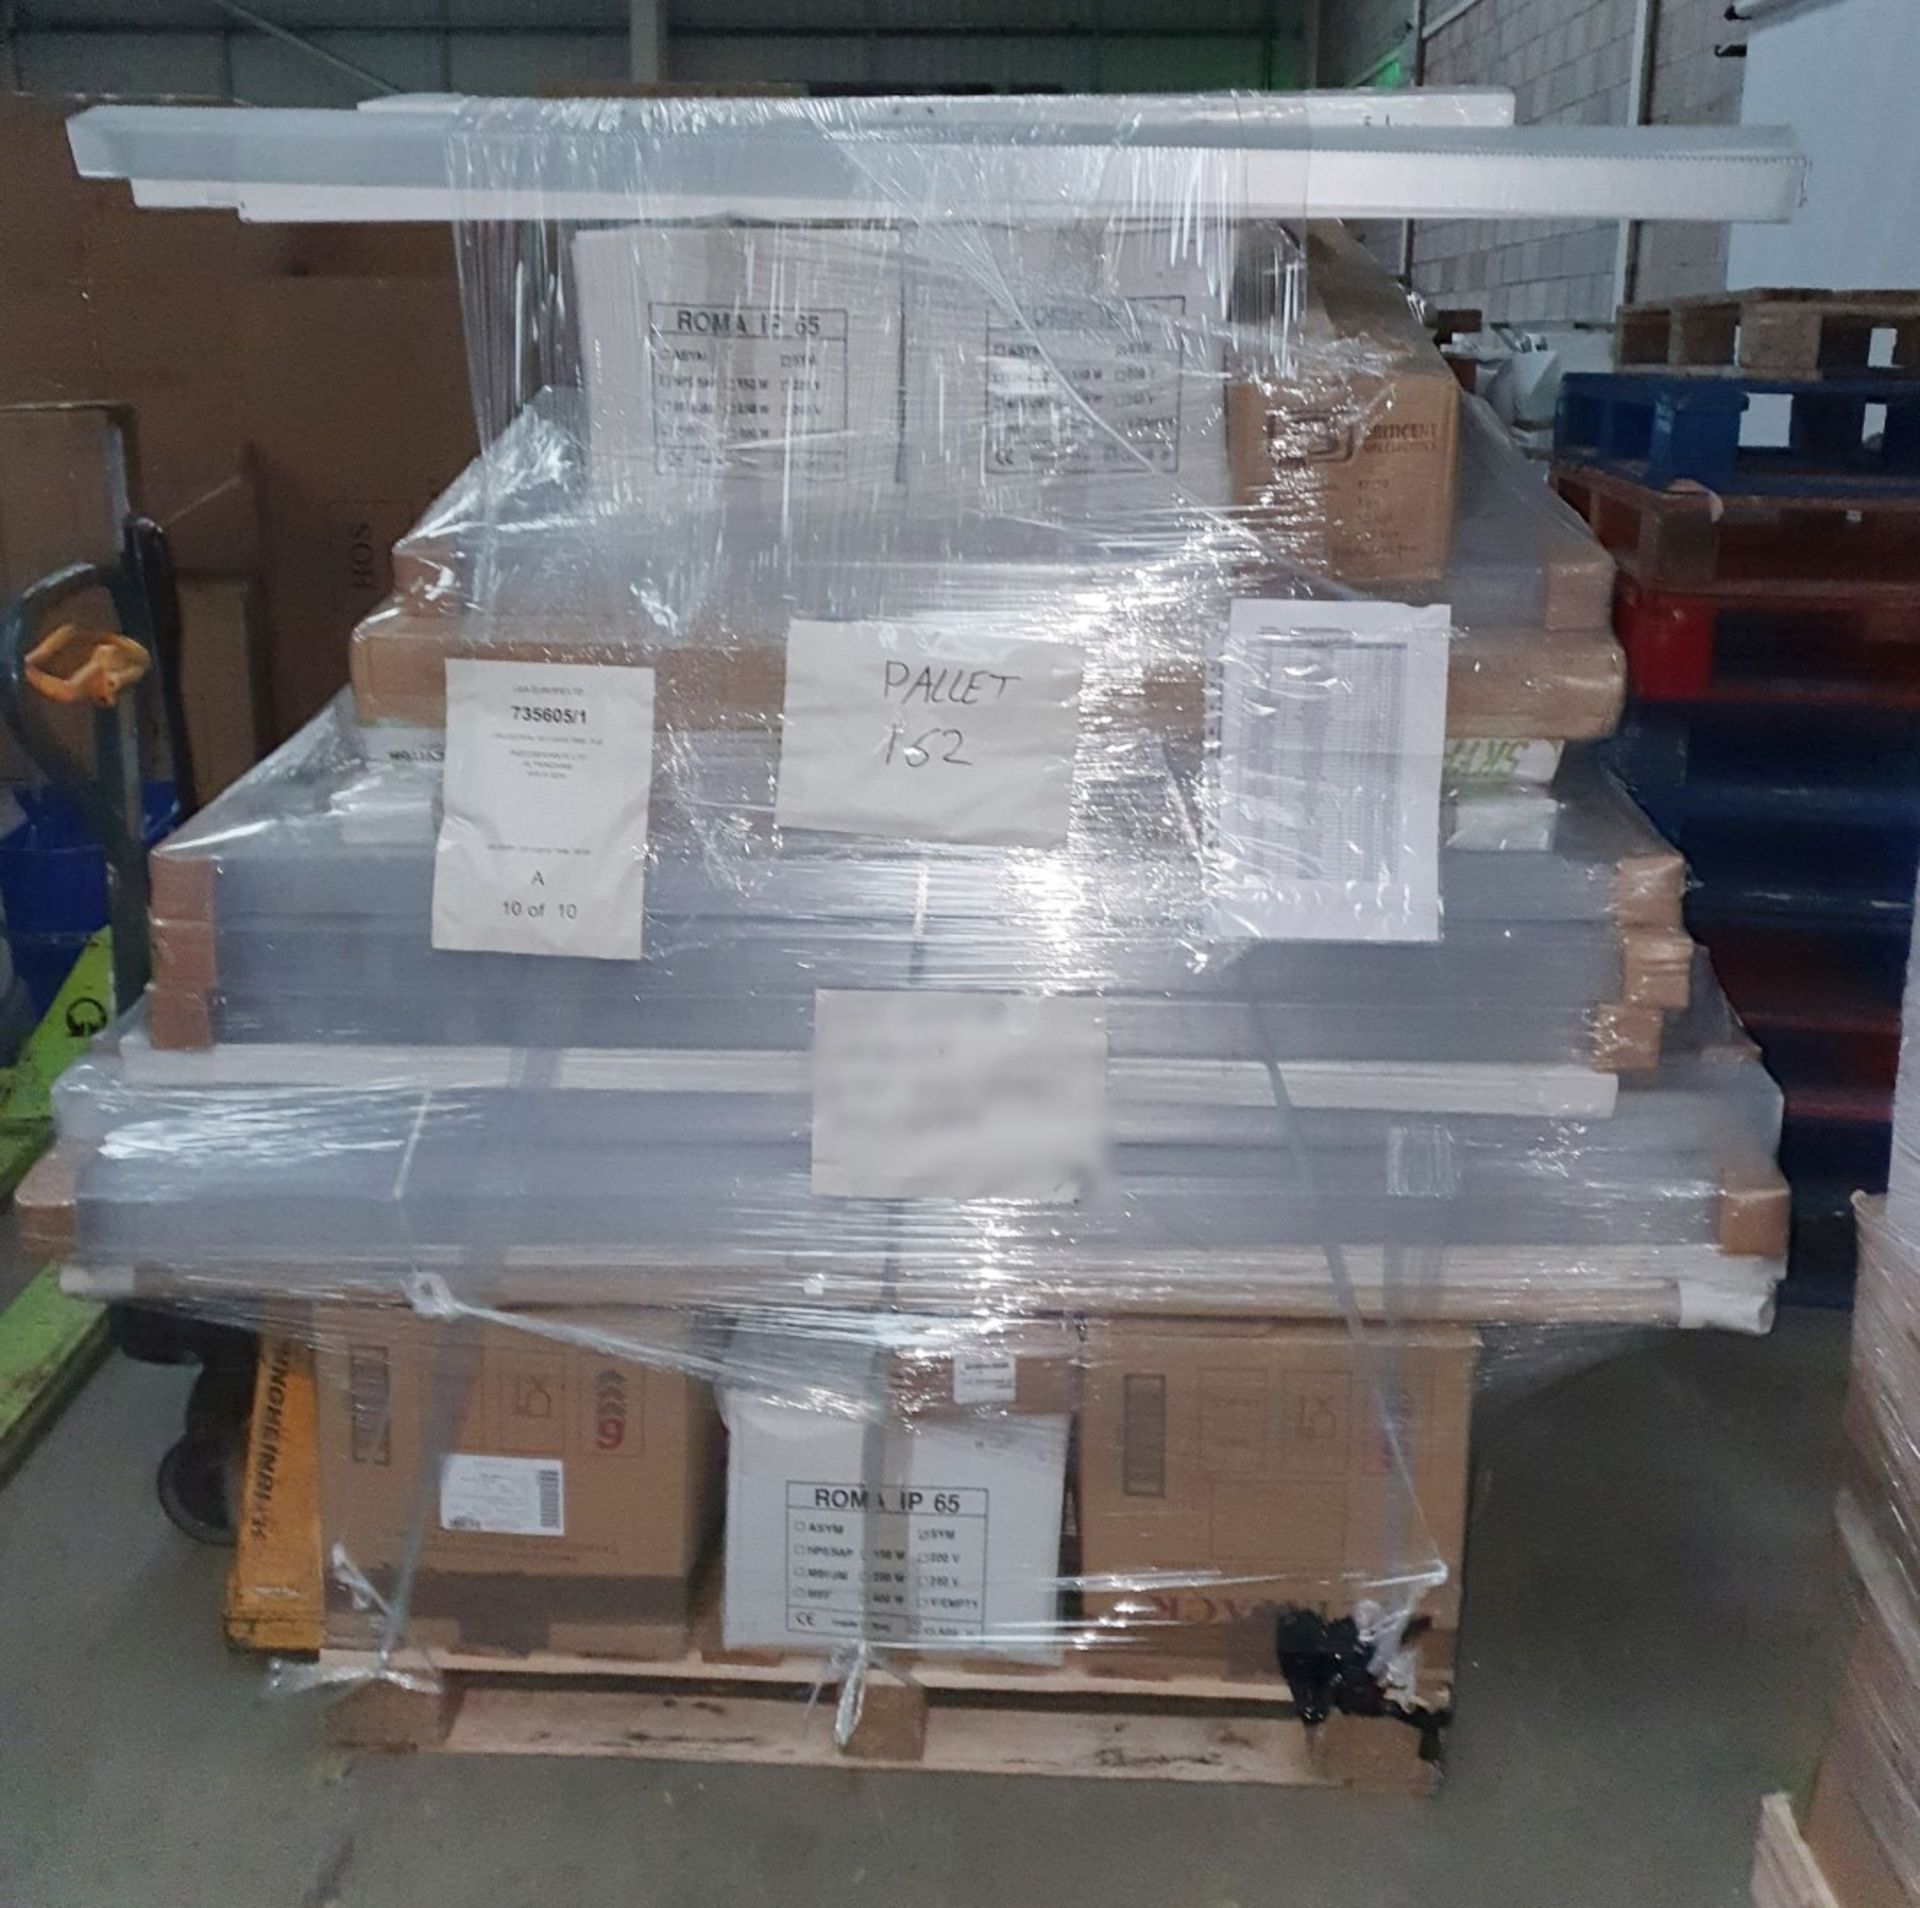 2 Pallets of Assorted Lighting and Electrical - Sockets, Lights, Switches - Ref: 162, 163 - CL460 - Bild 2 aus 9